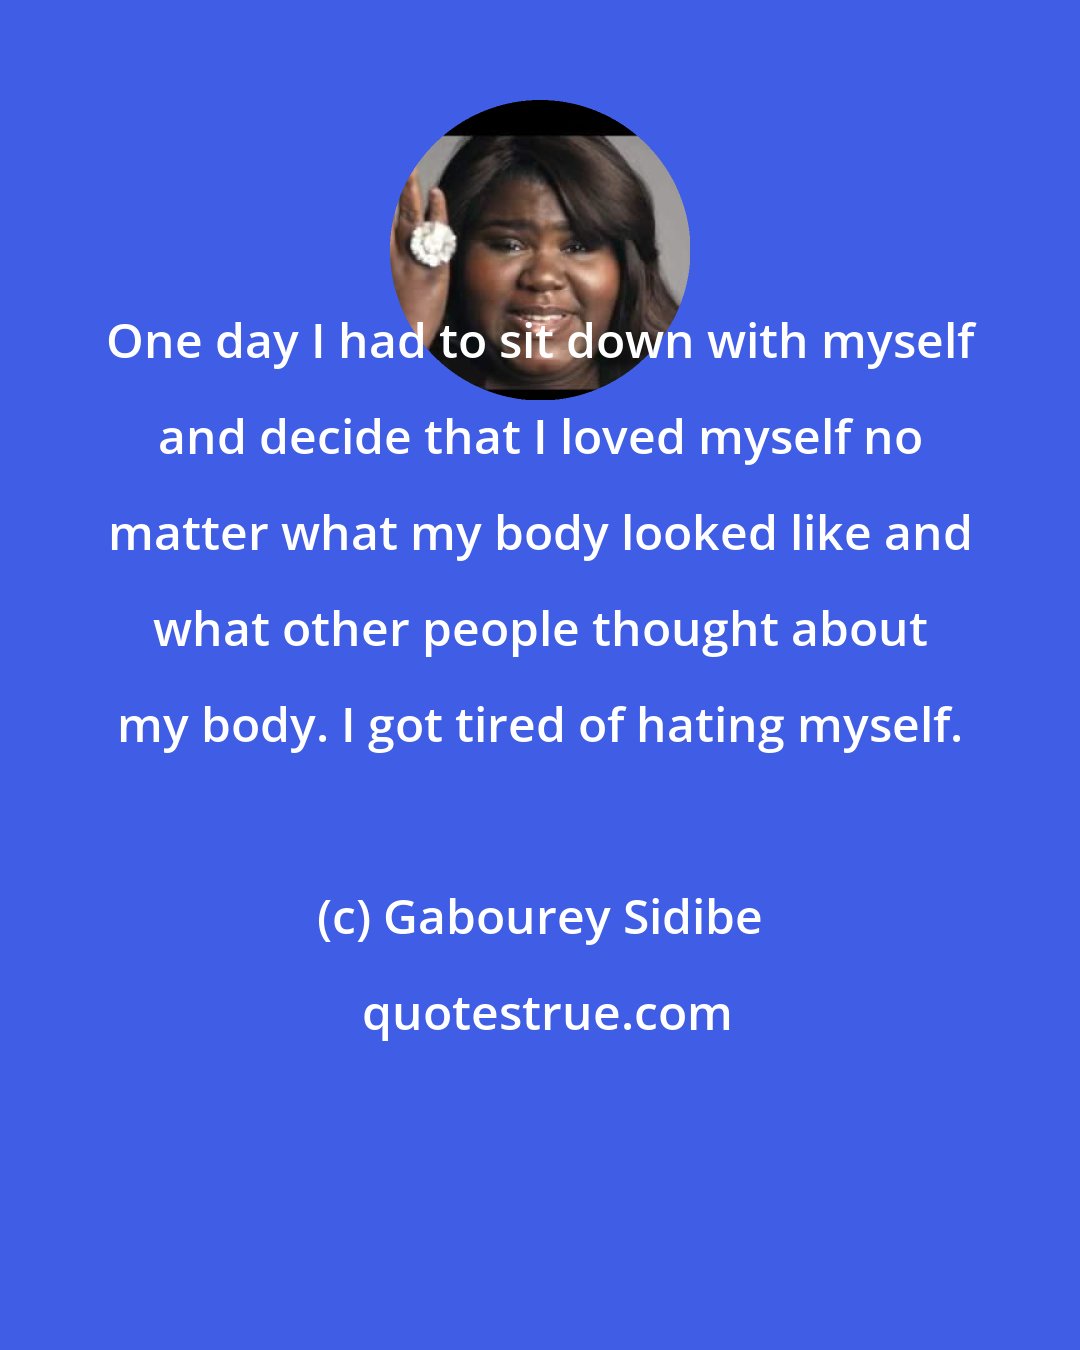 Gabourey Sidibe: One day I had to sit down with myself and decide that I loved myself no matter what my body looked like and what other people thought about my body. I got tired of hating myself.